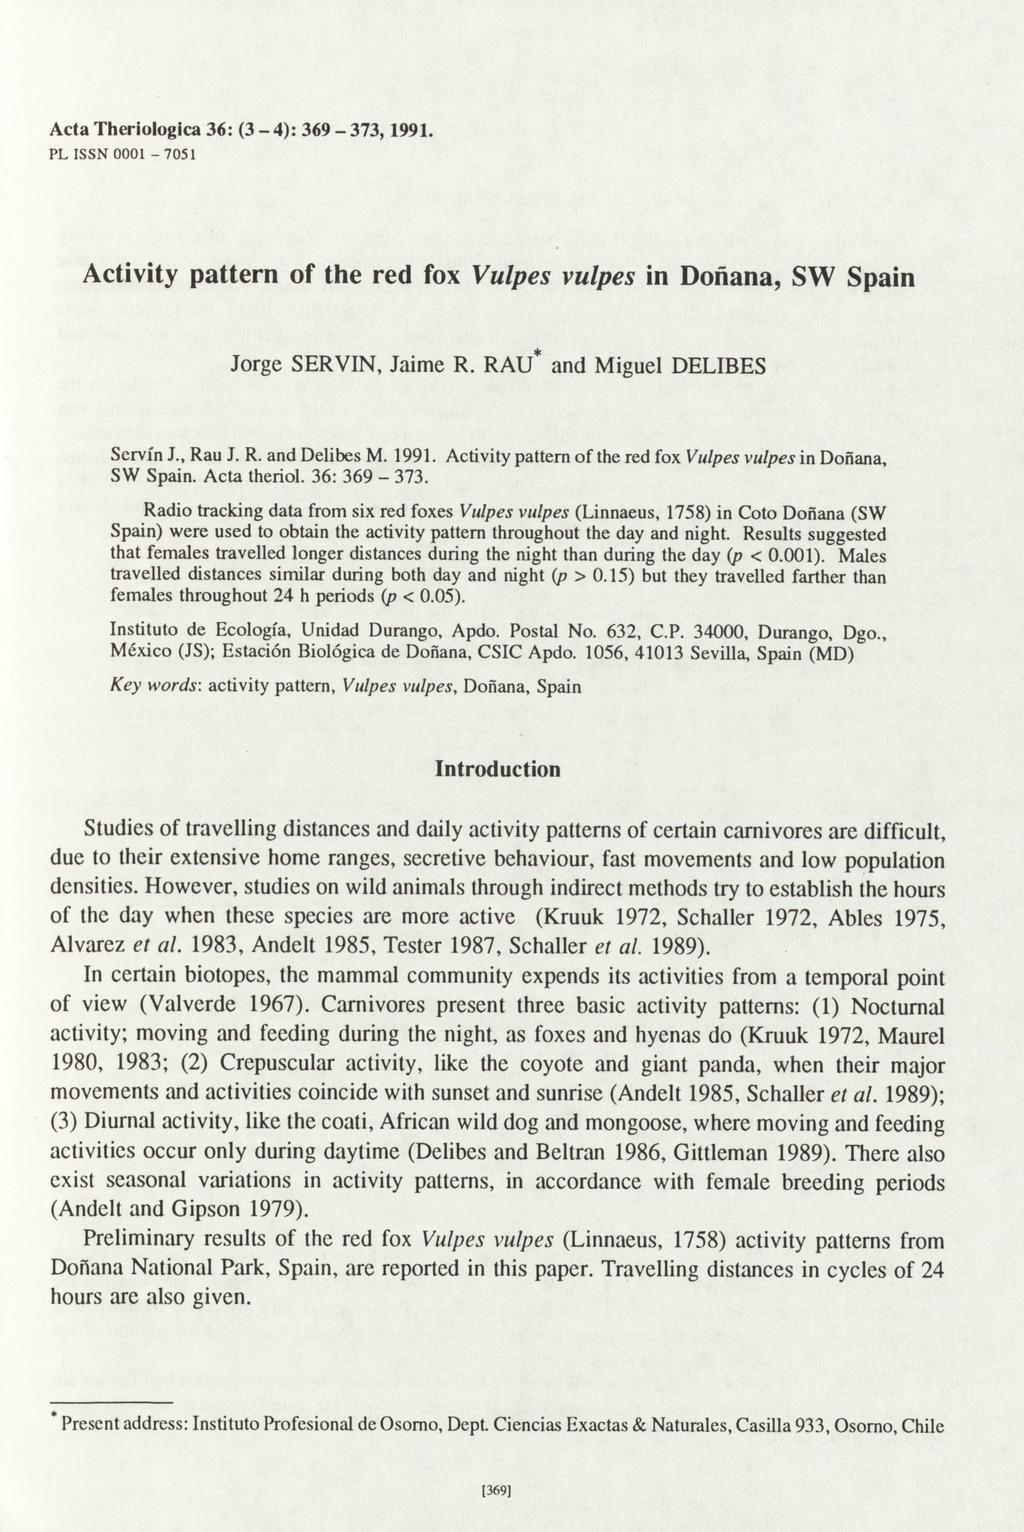 Acta Theriologica 36: (3-4): 369-373,1991. PL ISSN 0001-7 0 5 1 Activity pattern of the red fox Vulpes vulpes in Donana, SW Spain Jorge SERVIN, Jaime R. RAU* and M iguel DELIBES Servín J., Rau J. R. and Delibes M.